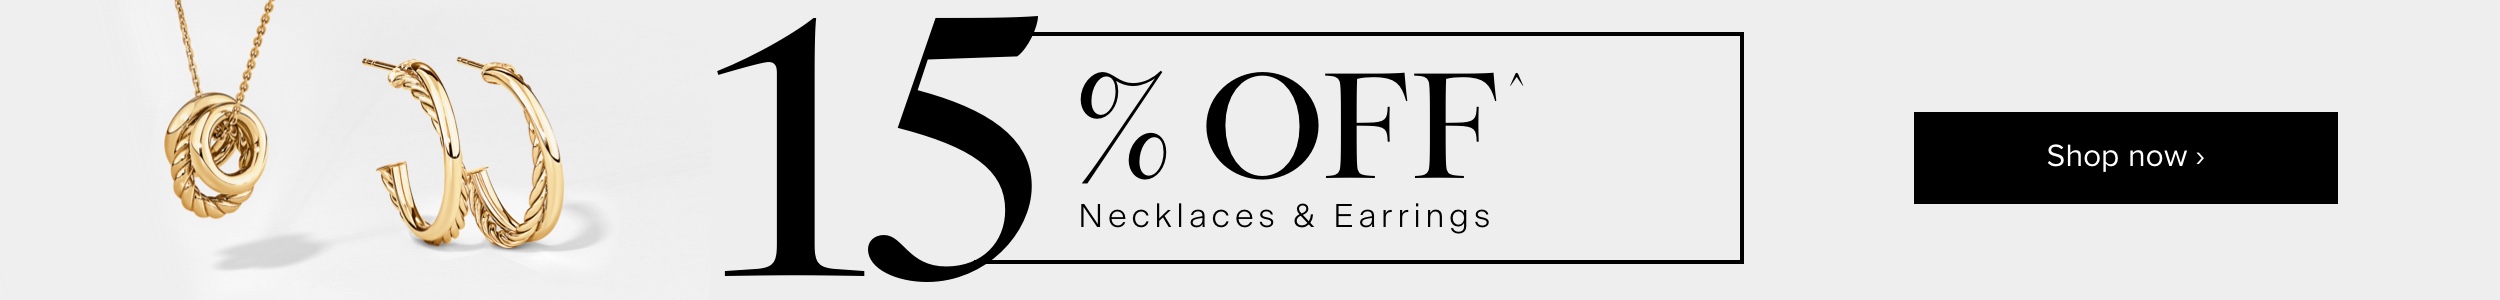 15% off Necklaces & Earrings